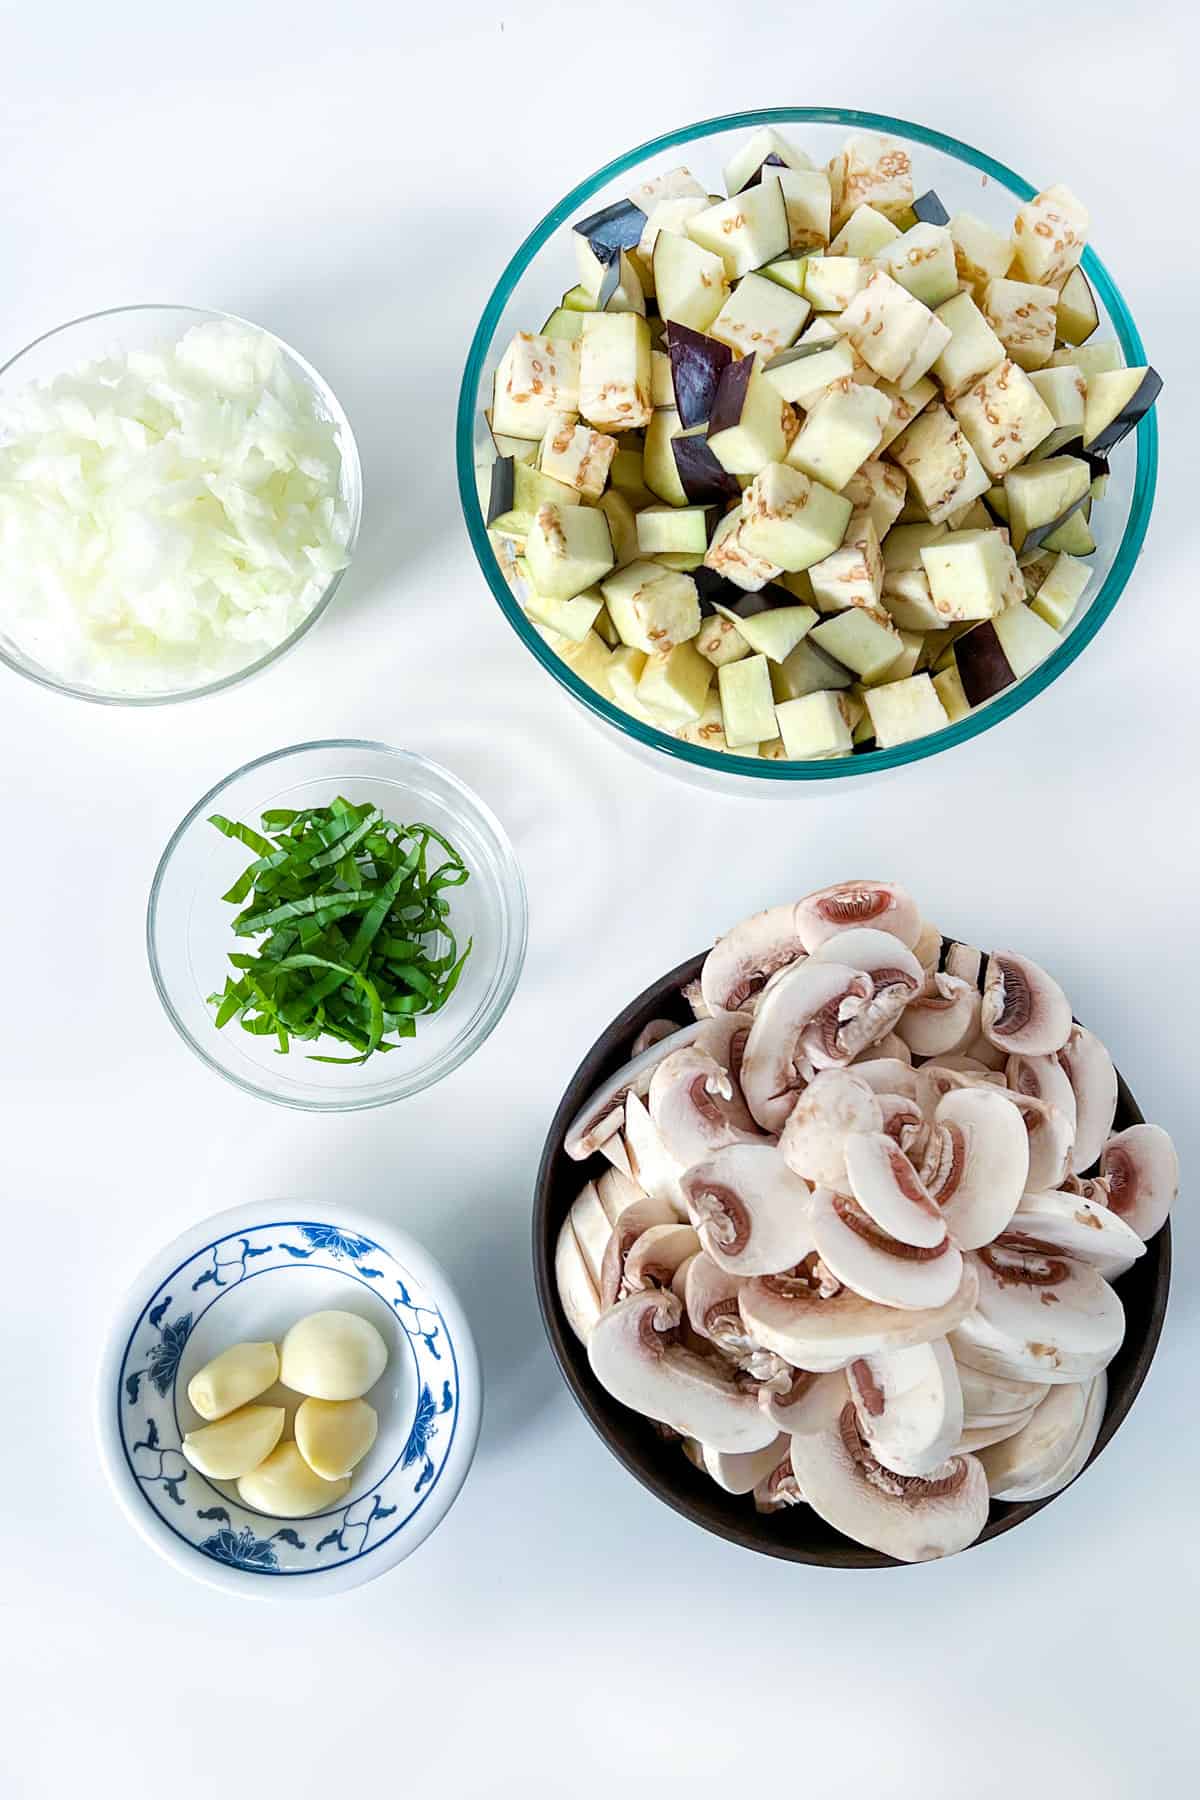 bowls of ingredients on a white countertop: sliced mushrooms, cubed eggplant, peeled garlic, chopped onions and slivered basil.